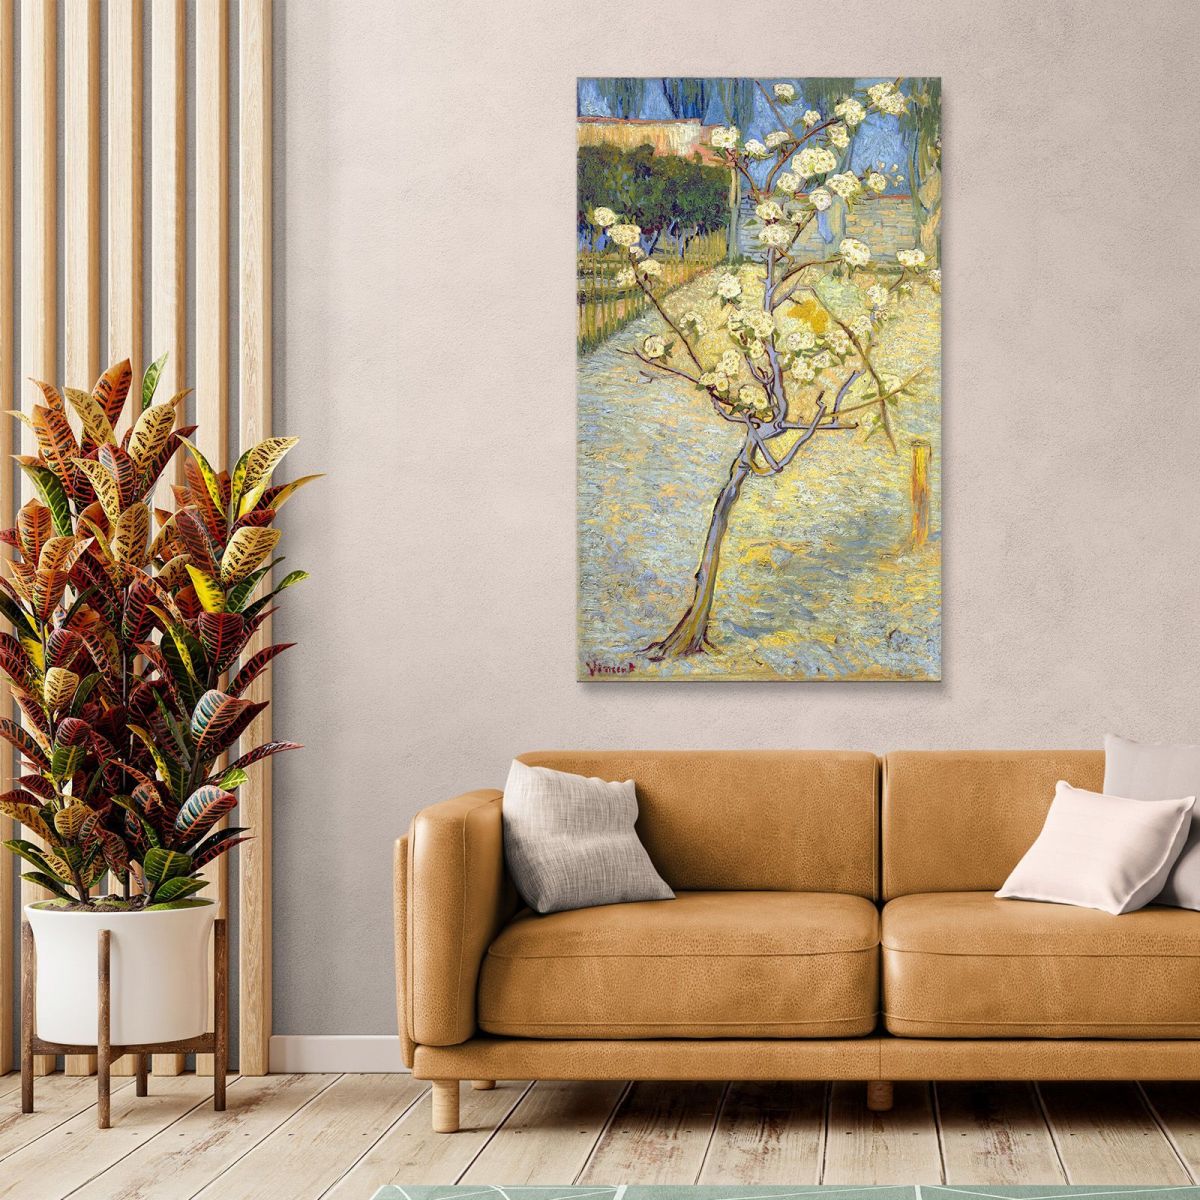 Small Pear Tree In Blossom Van Gogh Vincent canvas print vvg8